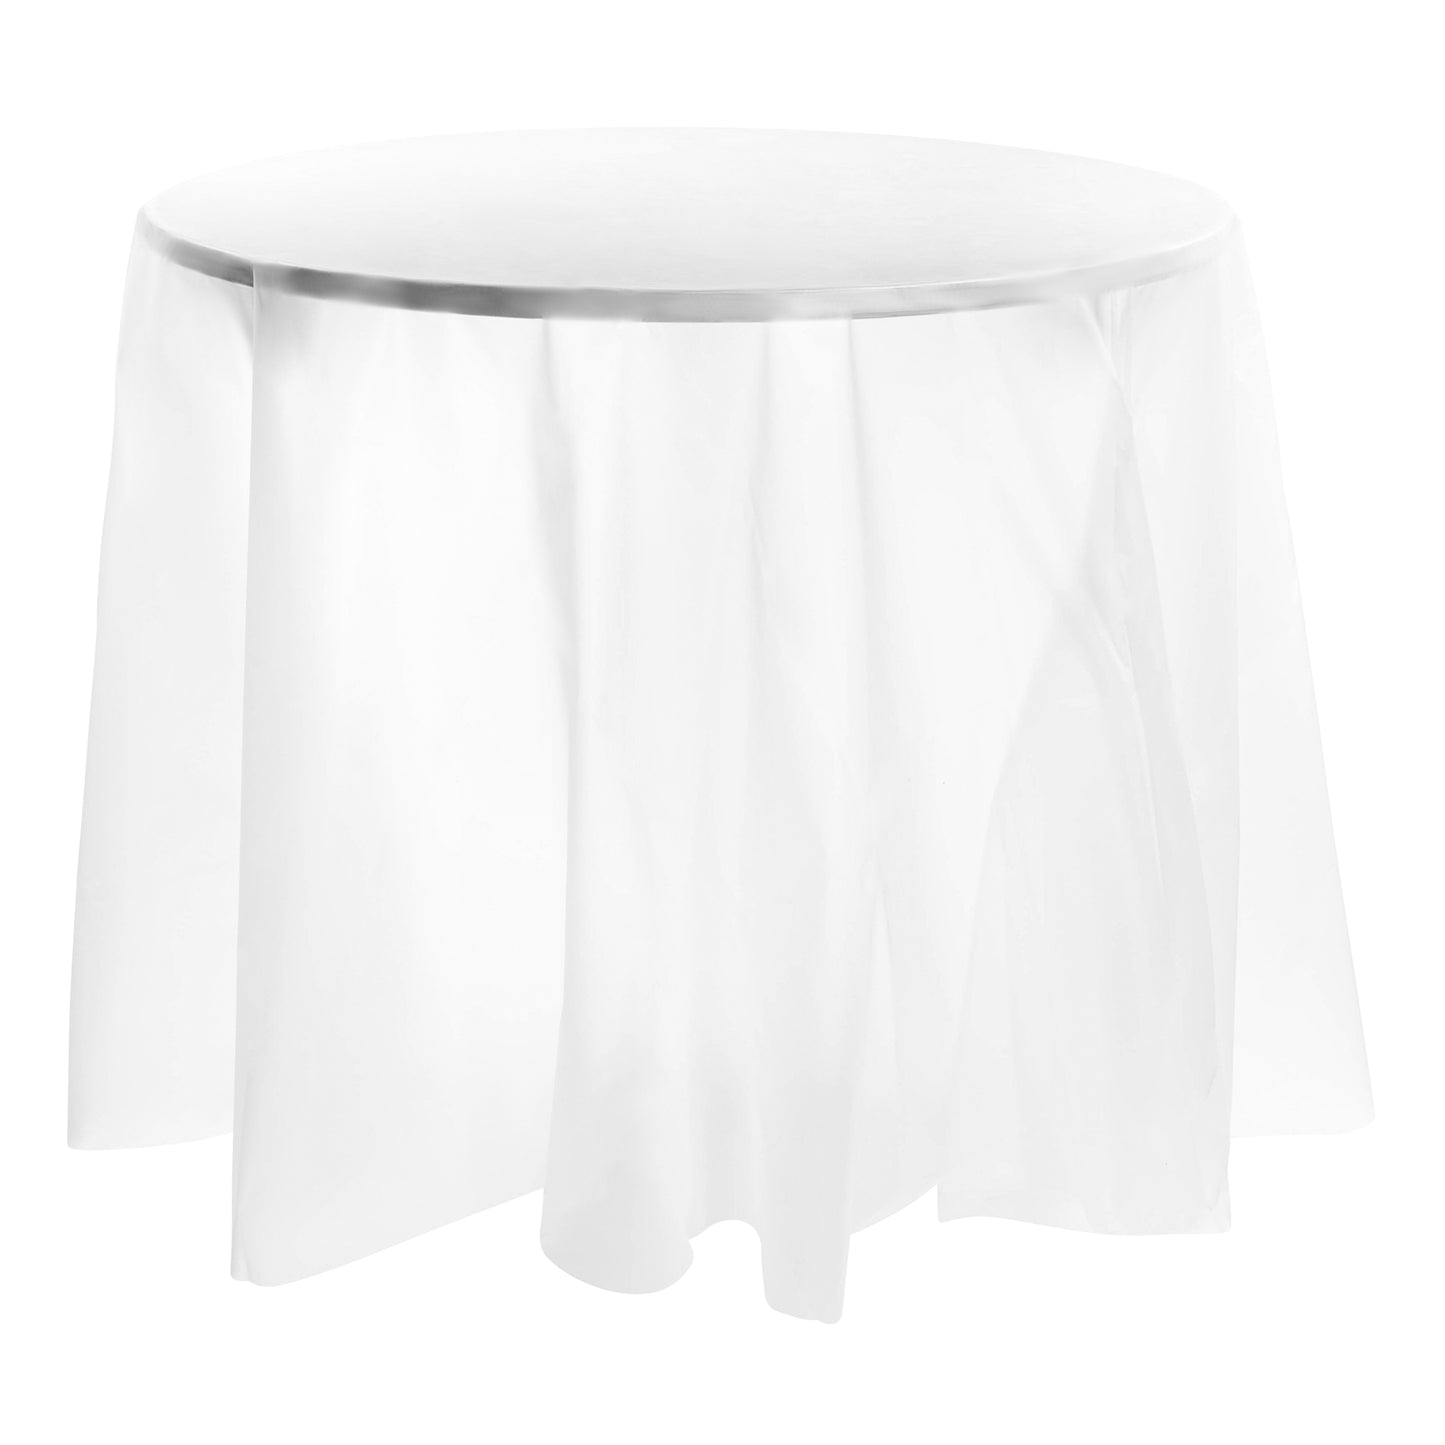 White Round Plastic Tablecloths (84")